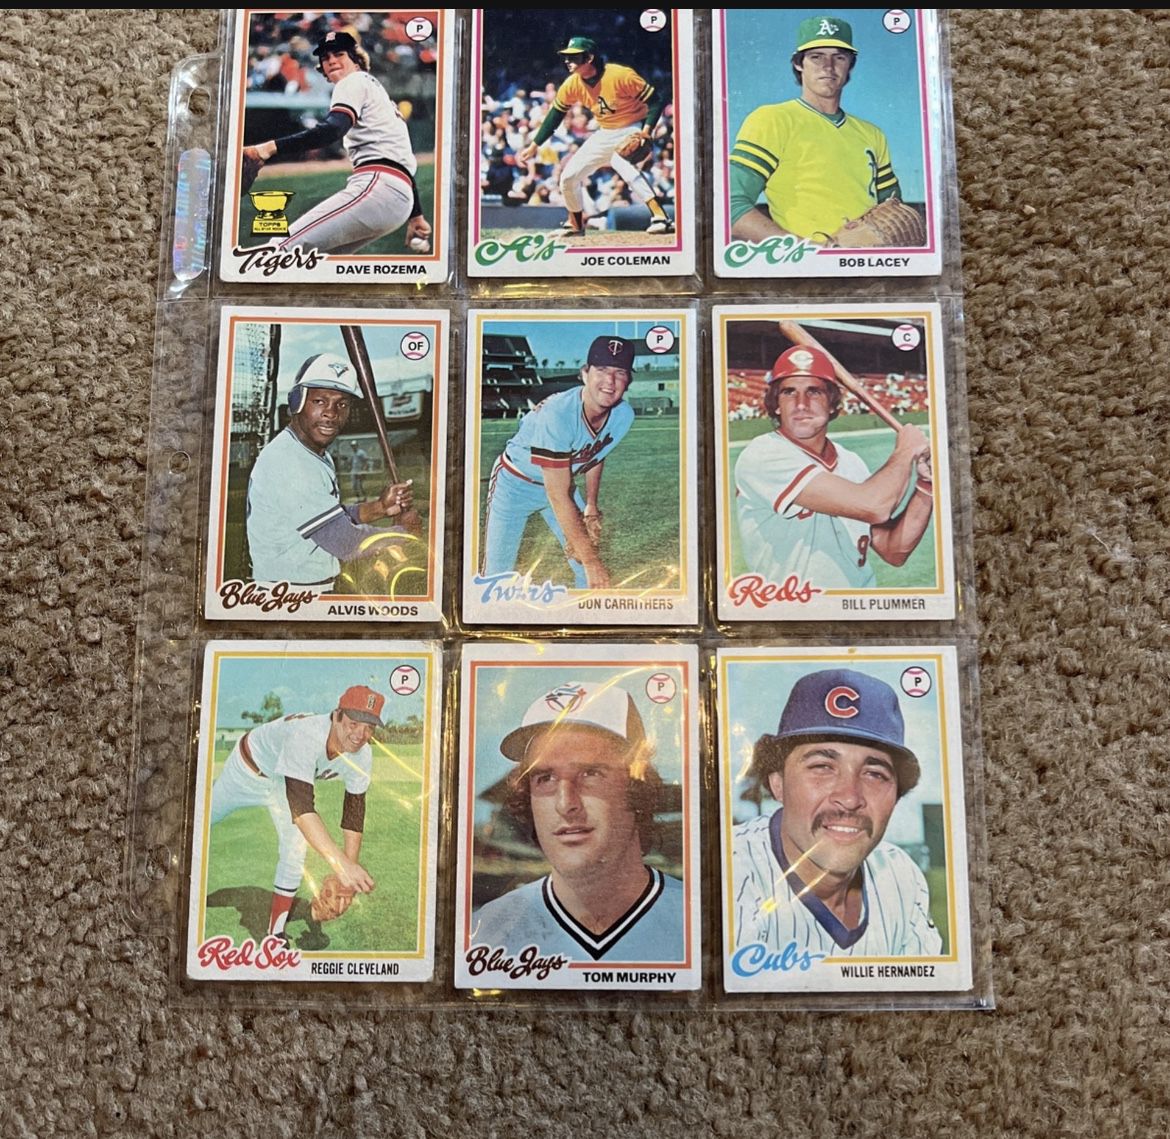 Clean Vintage  1978 Topps Baseball Card Lot #4 Includes TIGERS Dave Rozema’s Rookie Cup Card ! Additional Discounts Apply ! 